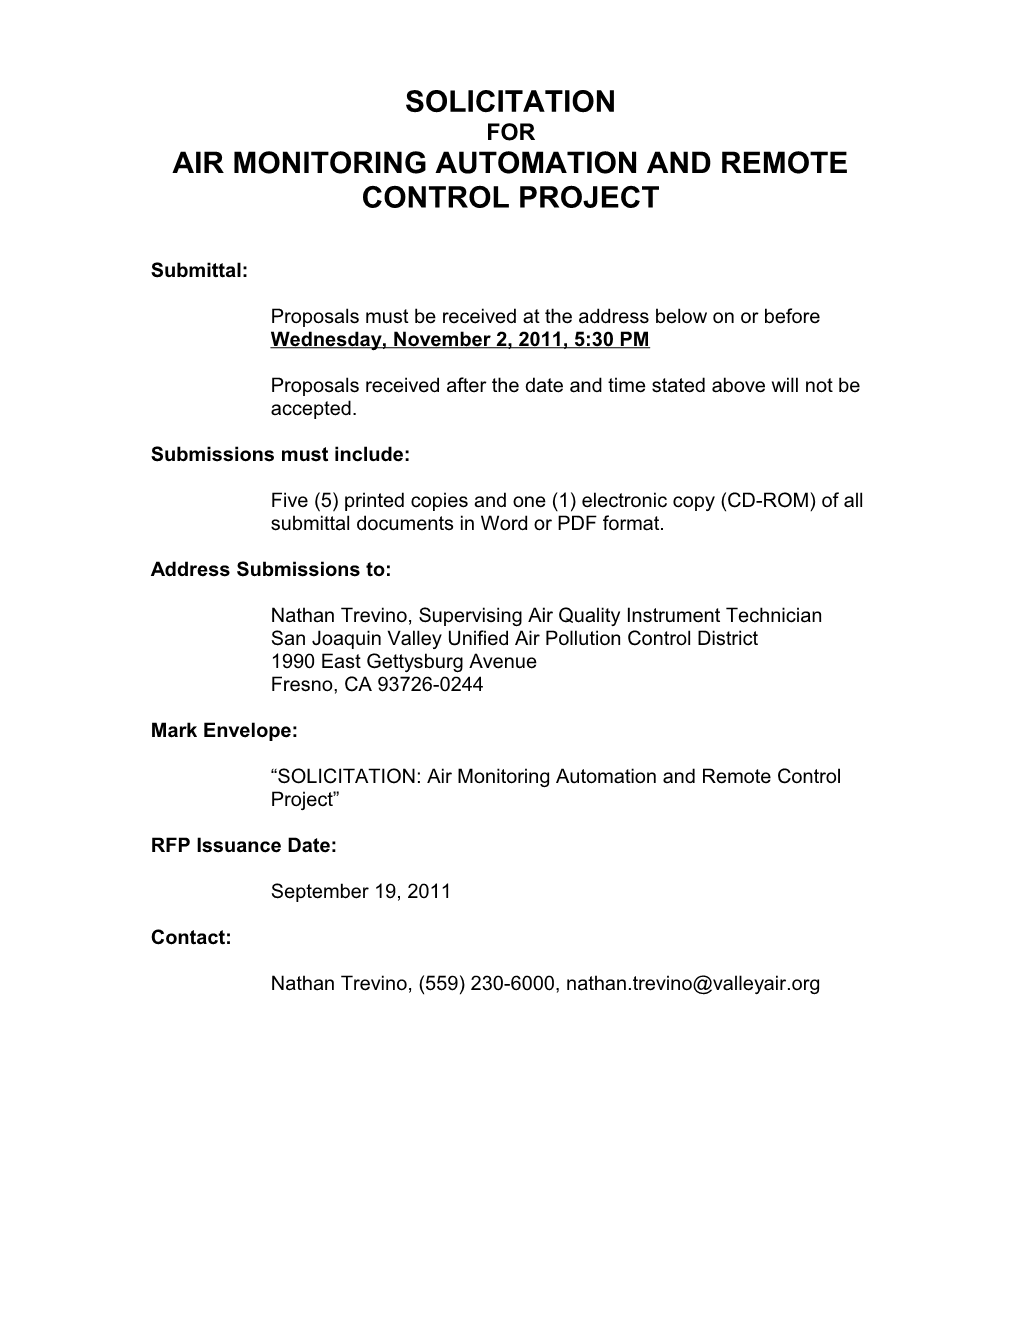 Air Monitoring Automation and Remote Control Project